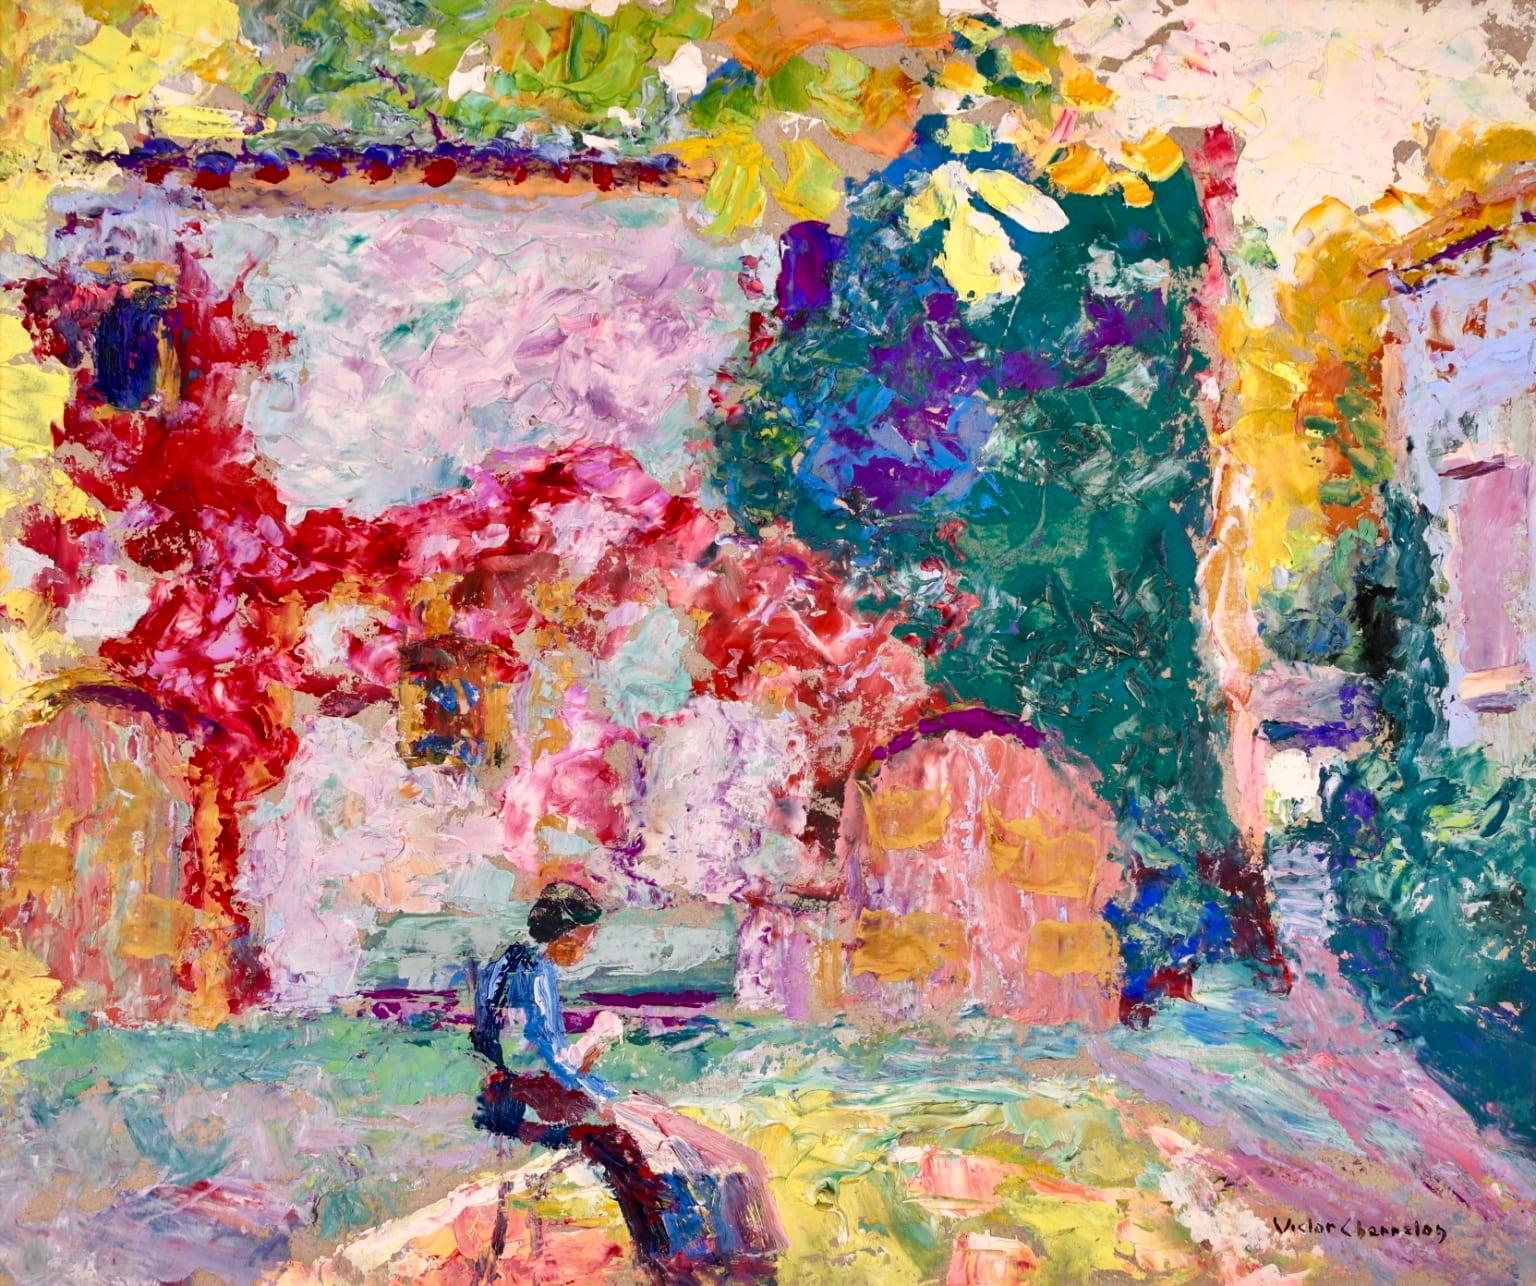 A wonderful oil on board circa 1920 by sought after French post impressionist painter Victor Charreton, who was known as the painter of colours. The piece depicts a woman in a blue dress sewing as she sits in a courtyard. The surrounding buildings